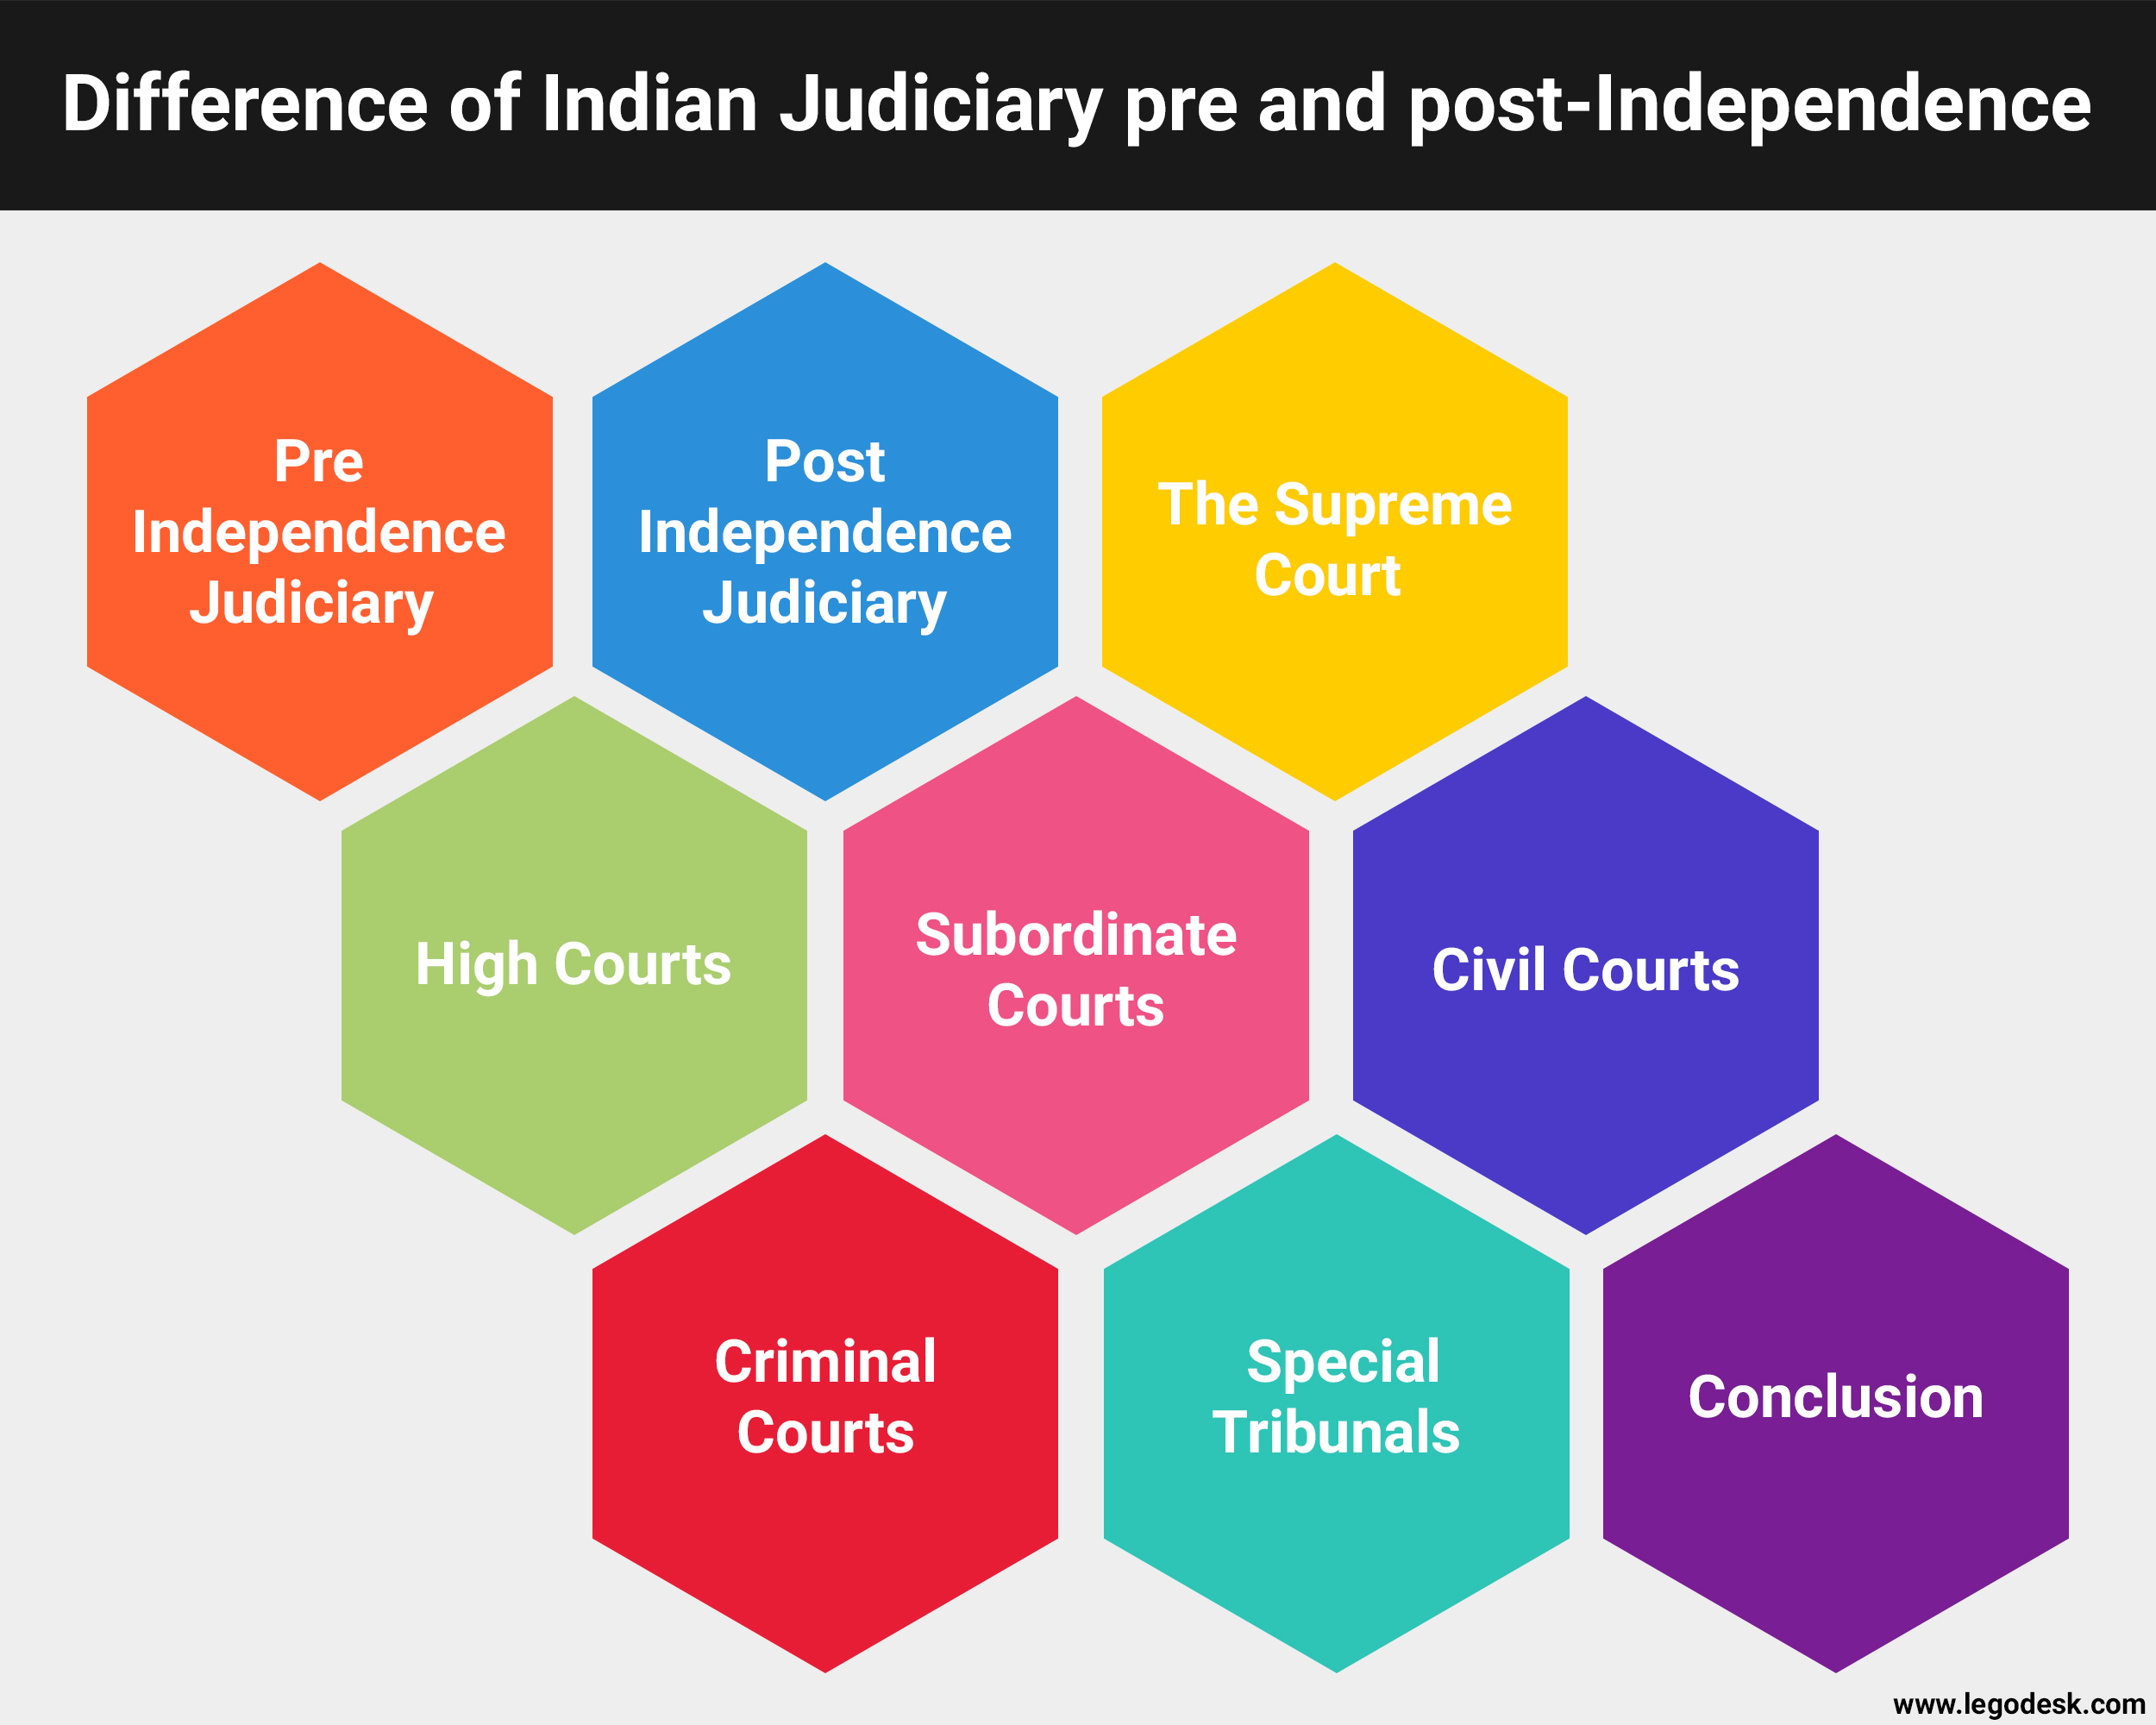 Difference of Indian Judiciary Pre and Post-Independence